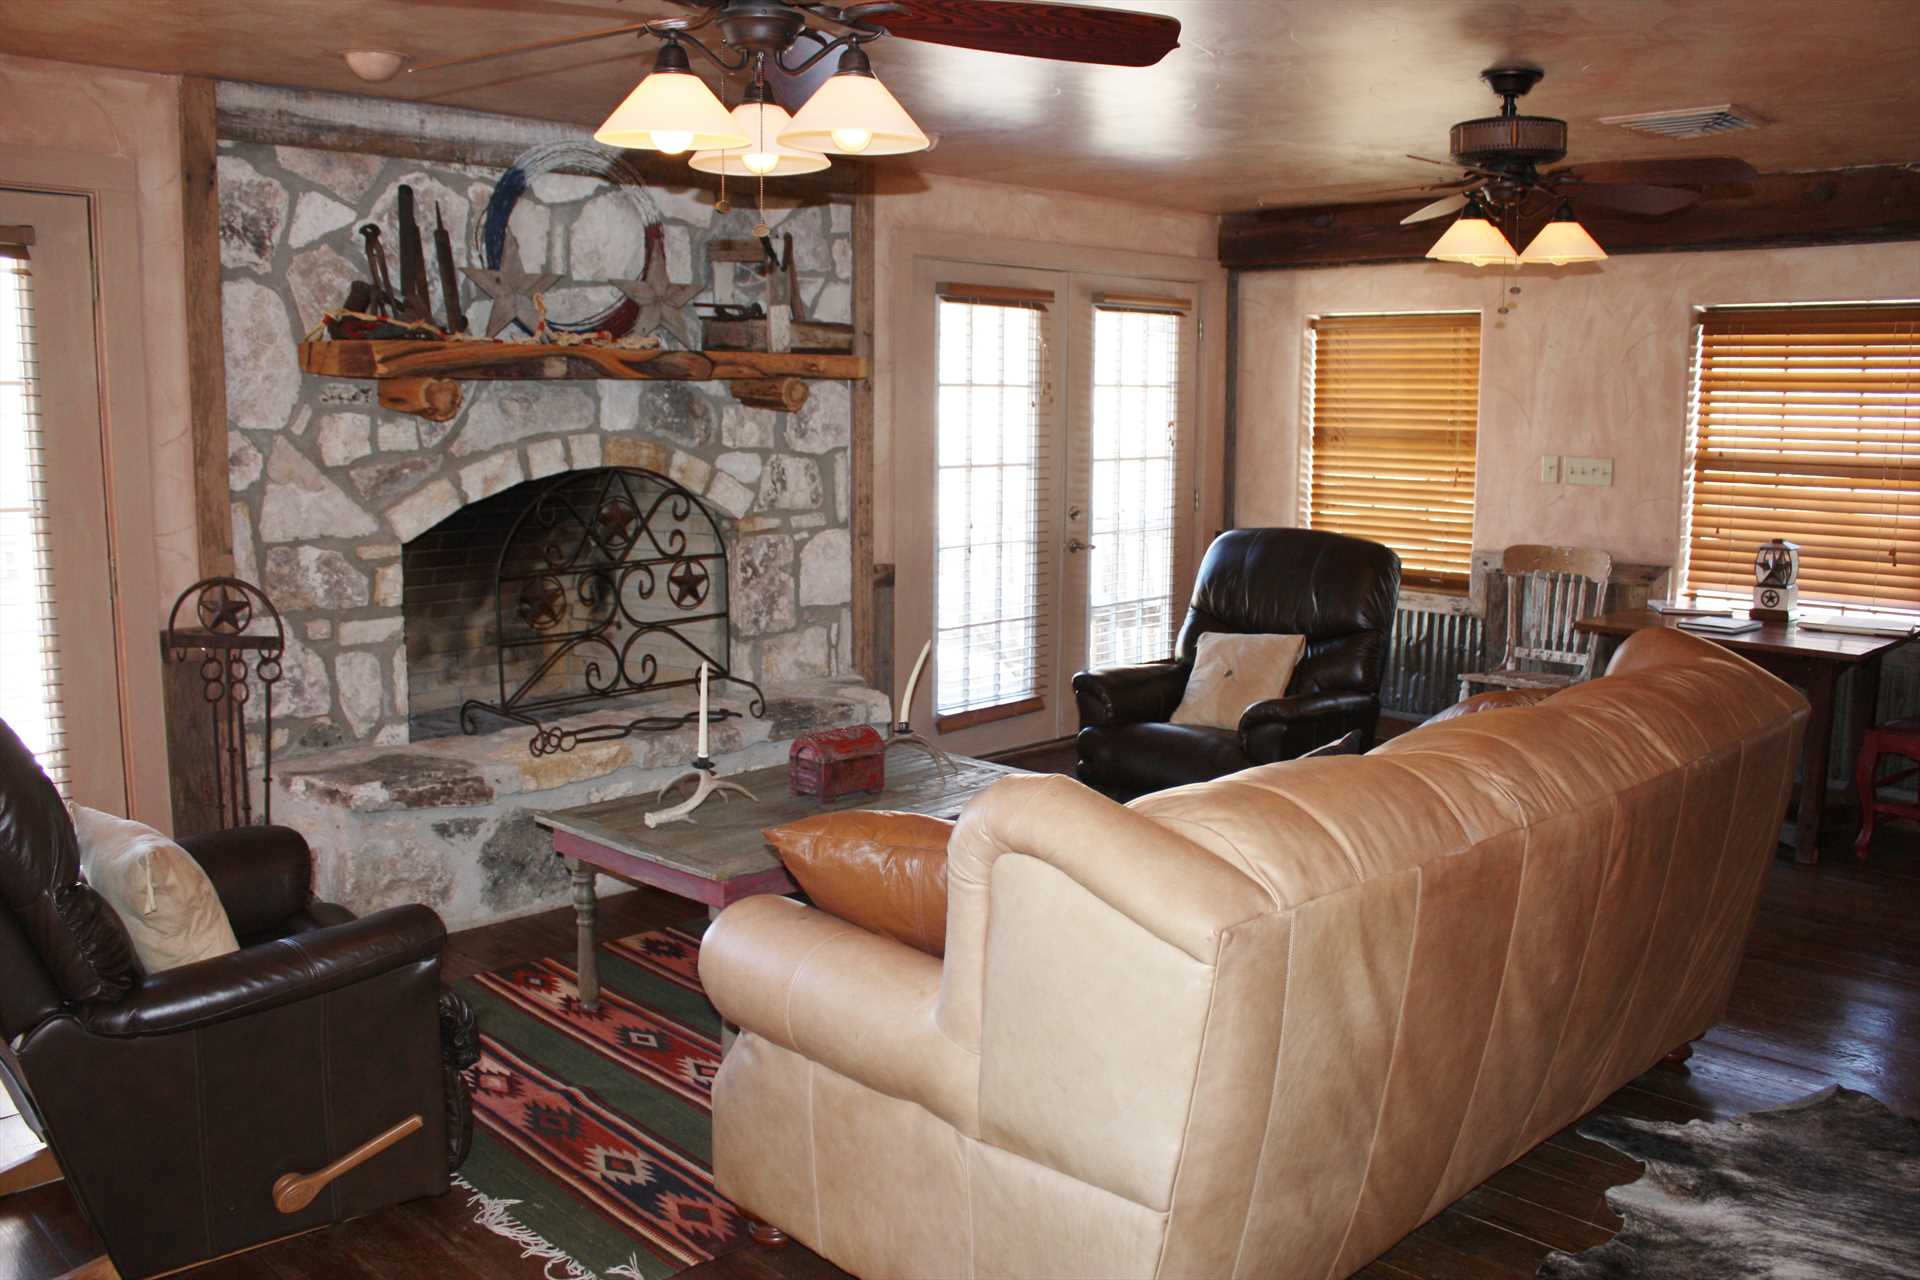                                                 Both the upstairs and downstairs living areas at the ranch feature the welcoming ambience created by fireplaces.